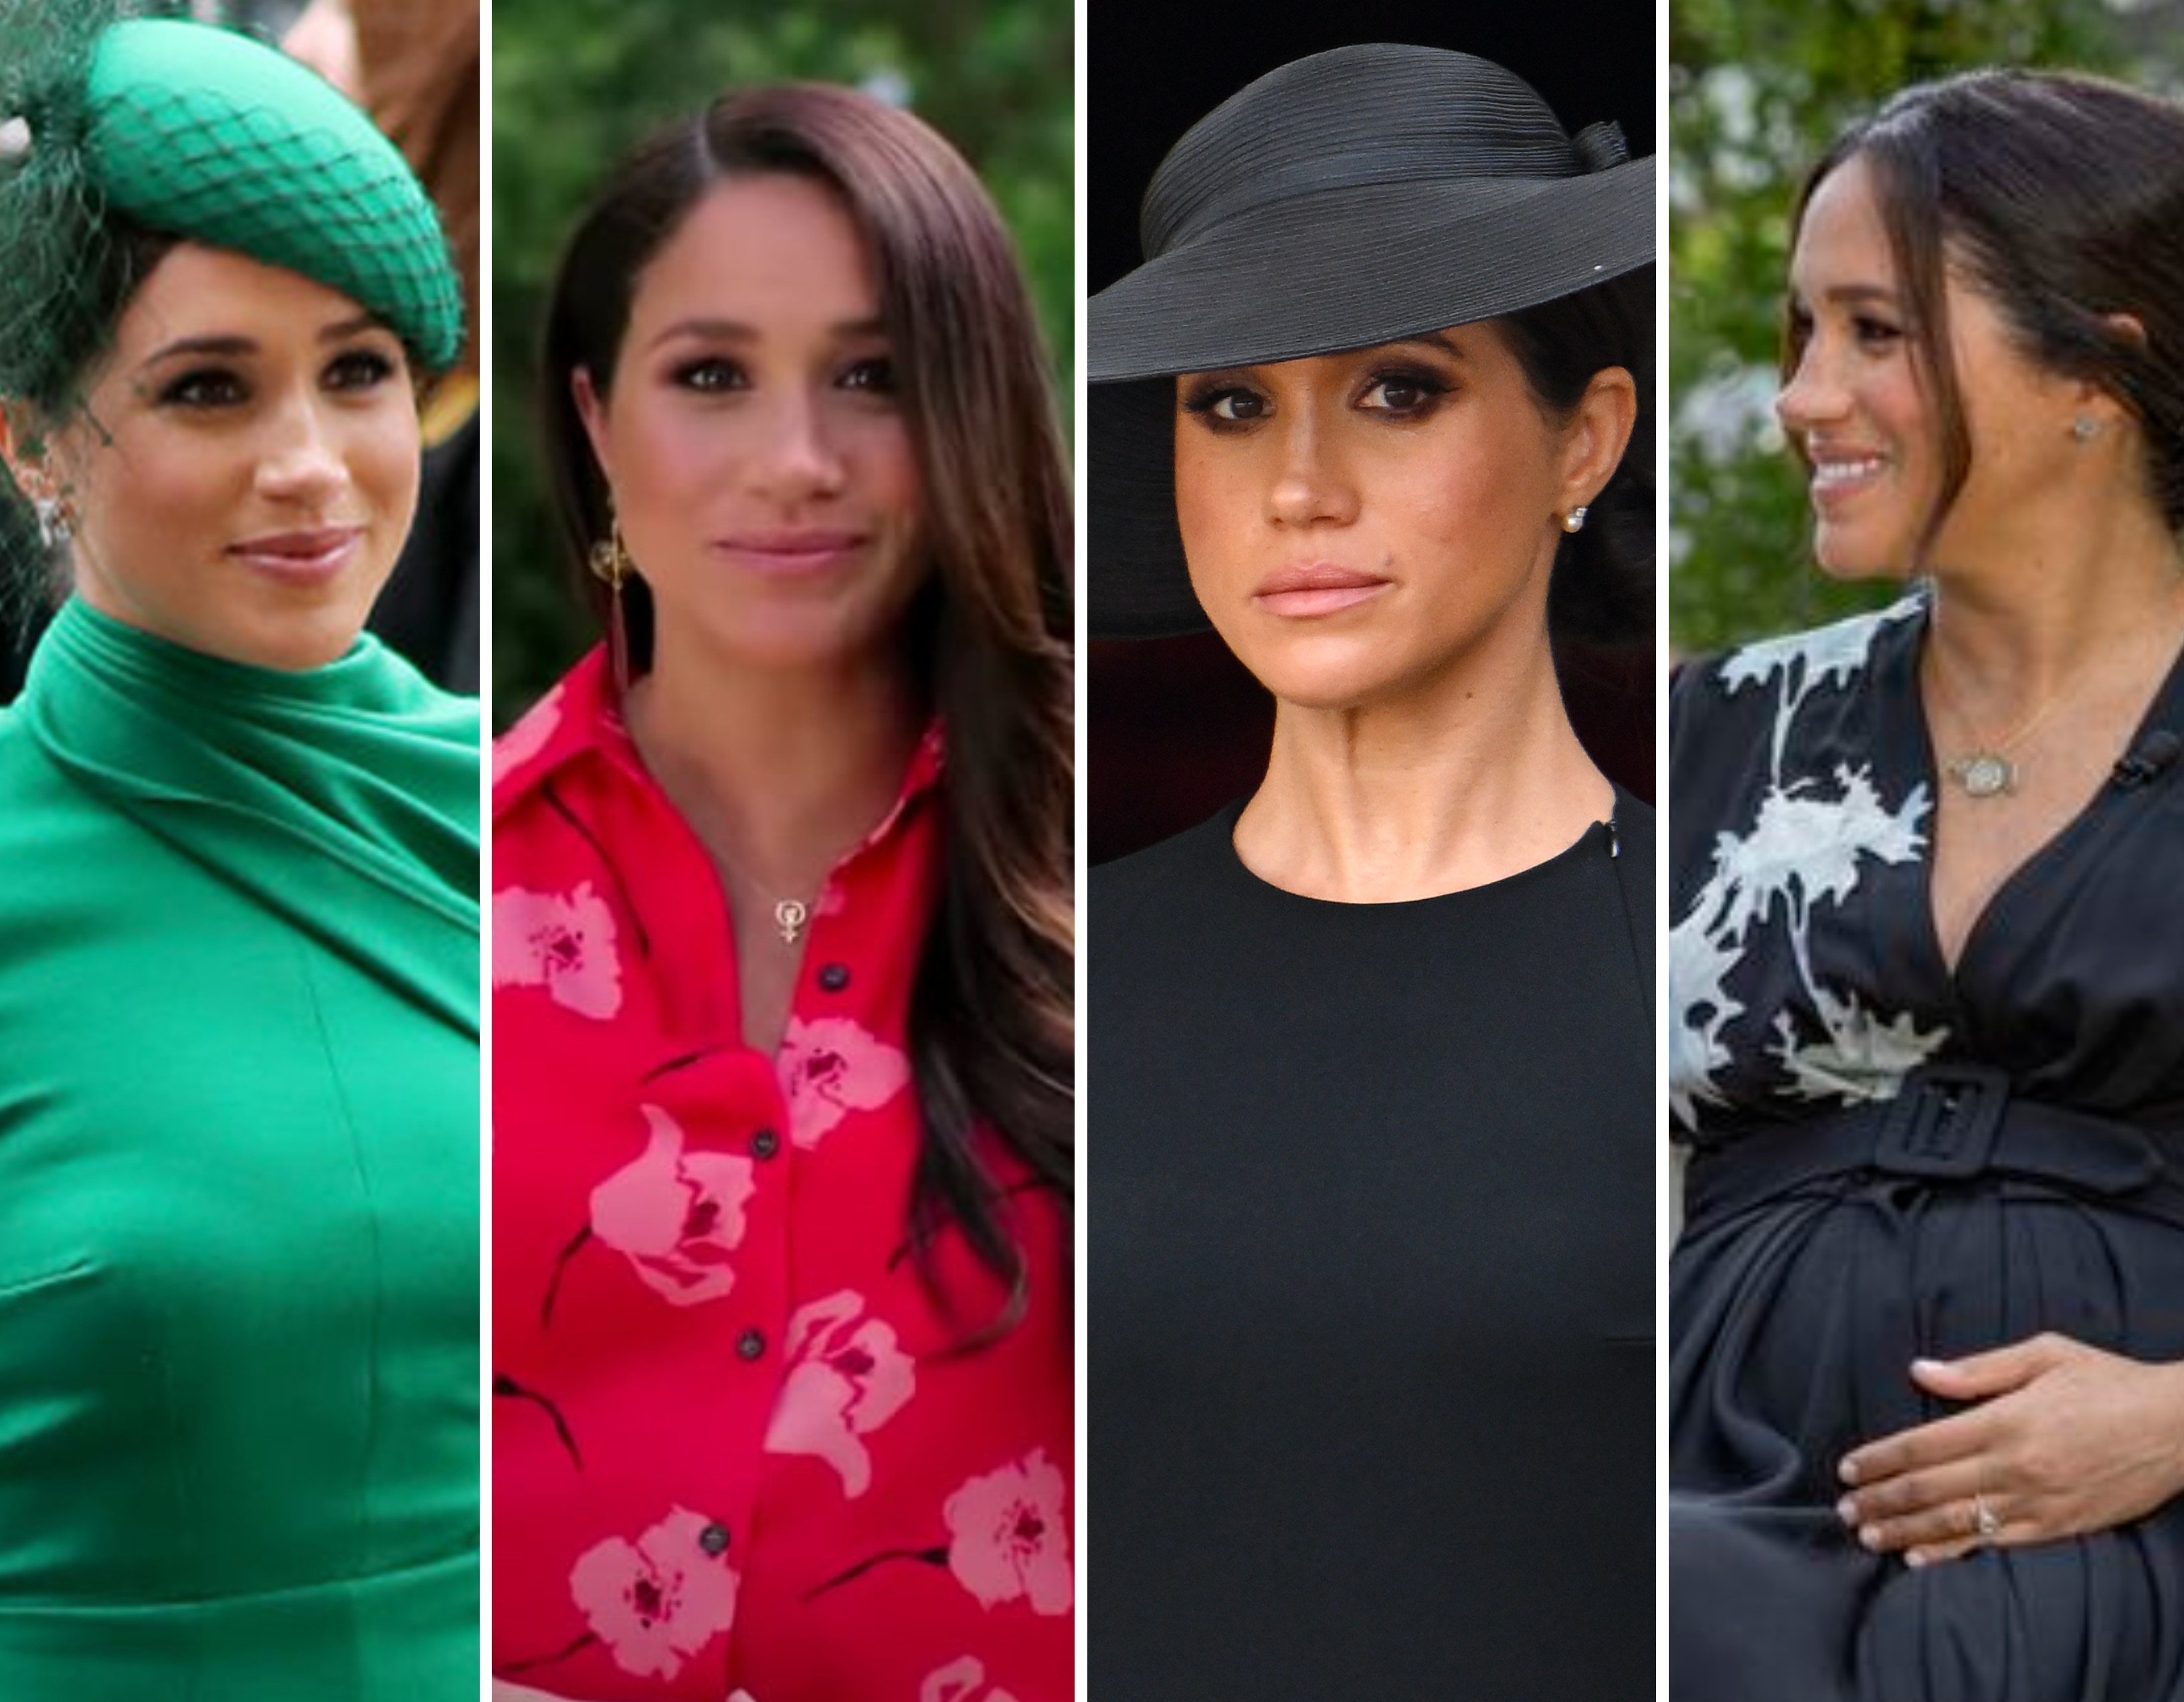 Meghan Markle’s outfits often contain special meanings. Photos: TNS, YouTube, WireImage